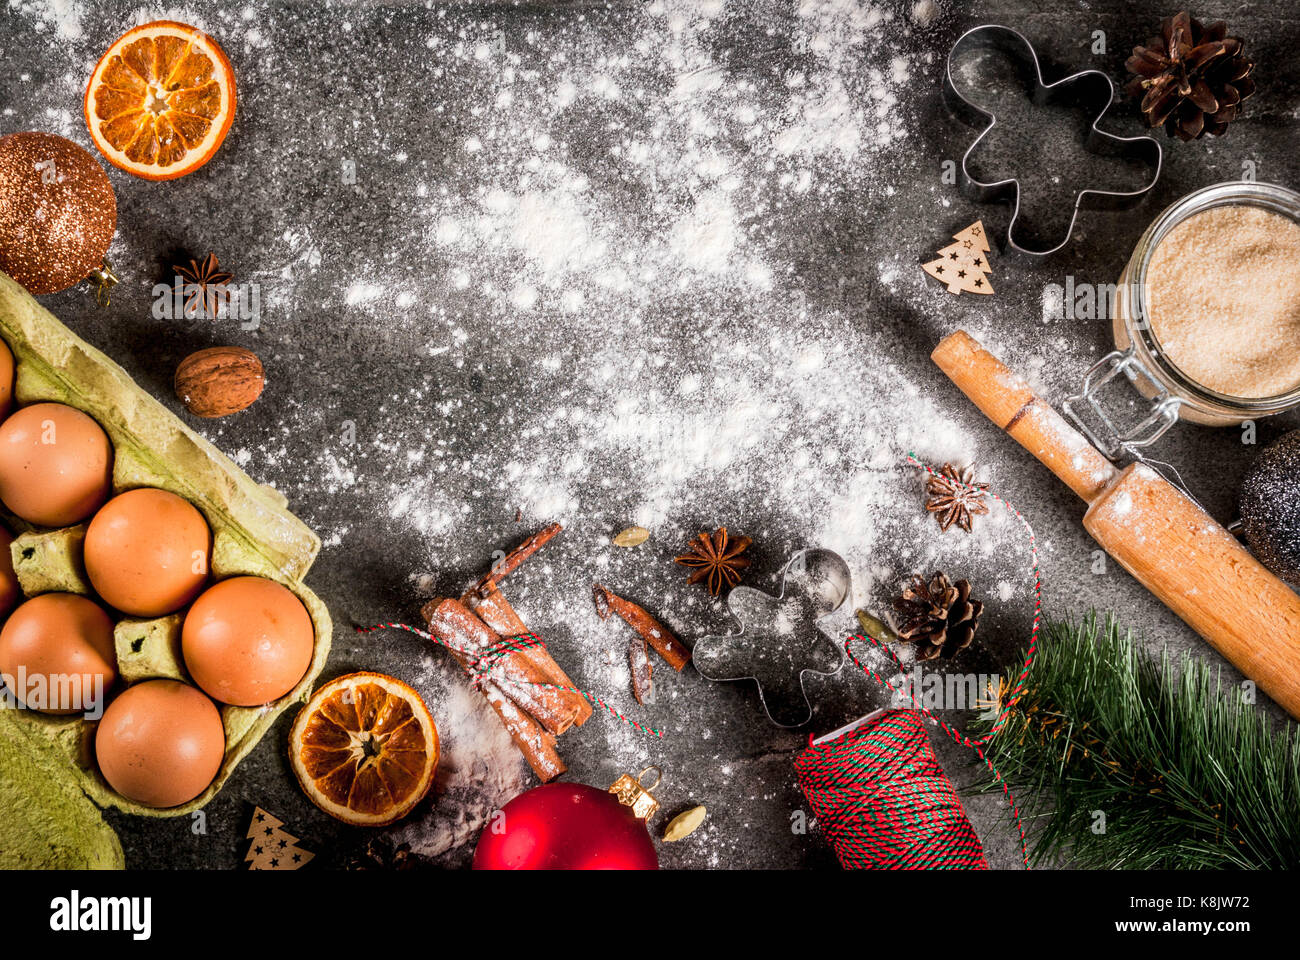 https://c8.alamy.com/comp/K8JW72/christmas-new-year-holiday-cooking-background-ingredients-spices-dried-K8JW72.jpg